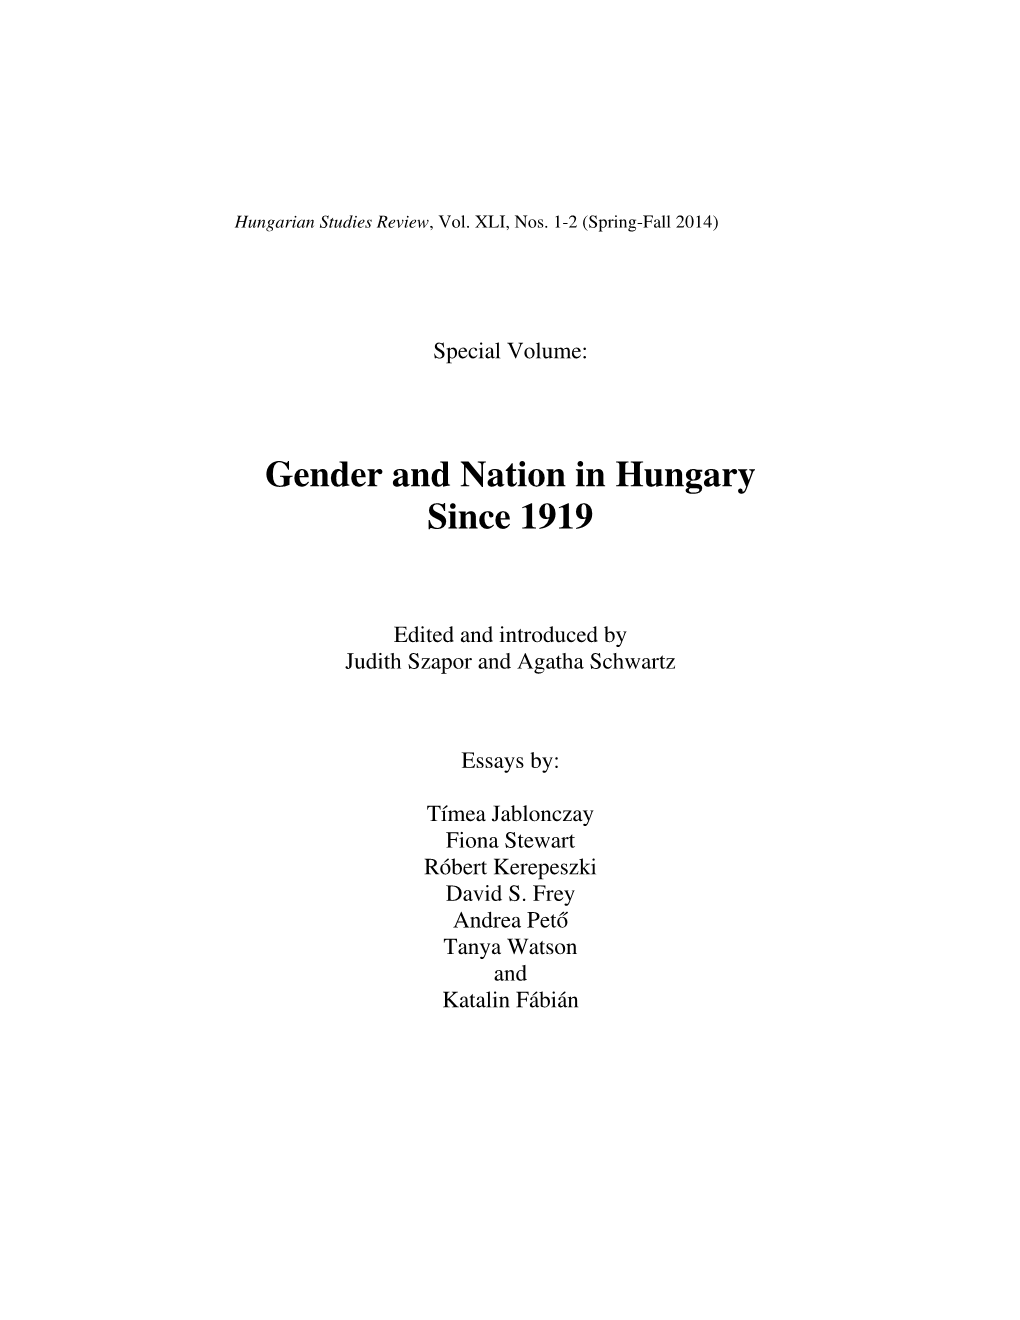 Gender and Nation in Hungary Since 1919